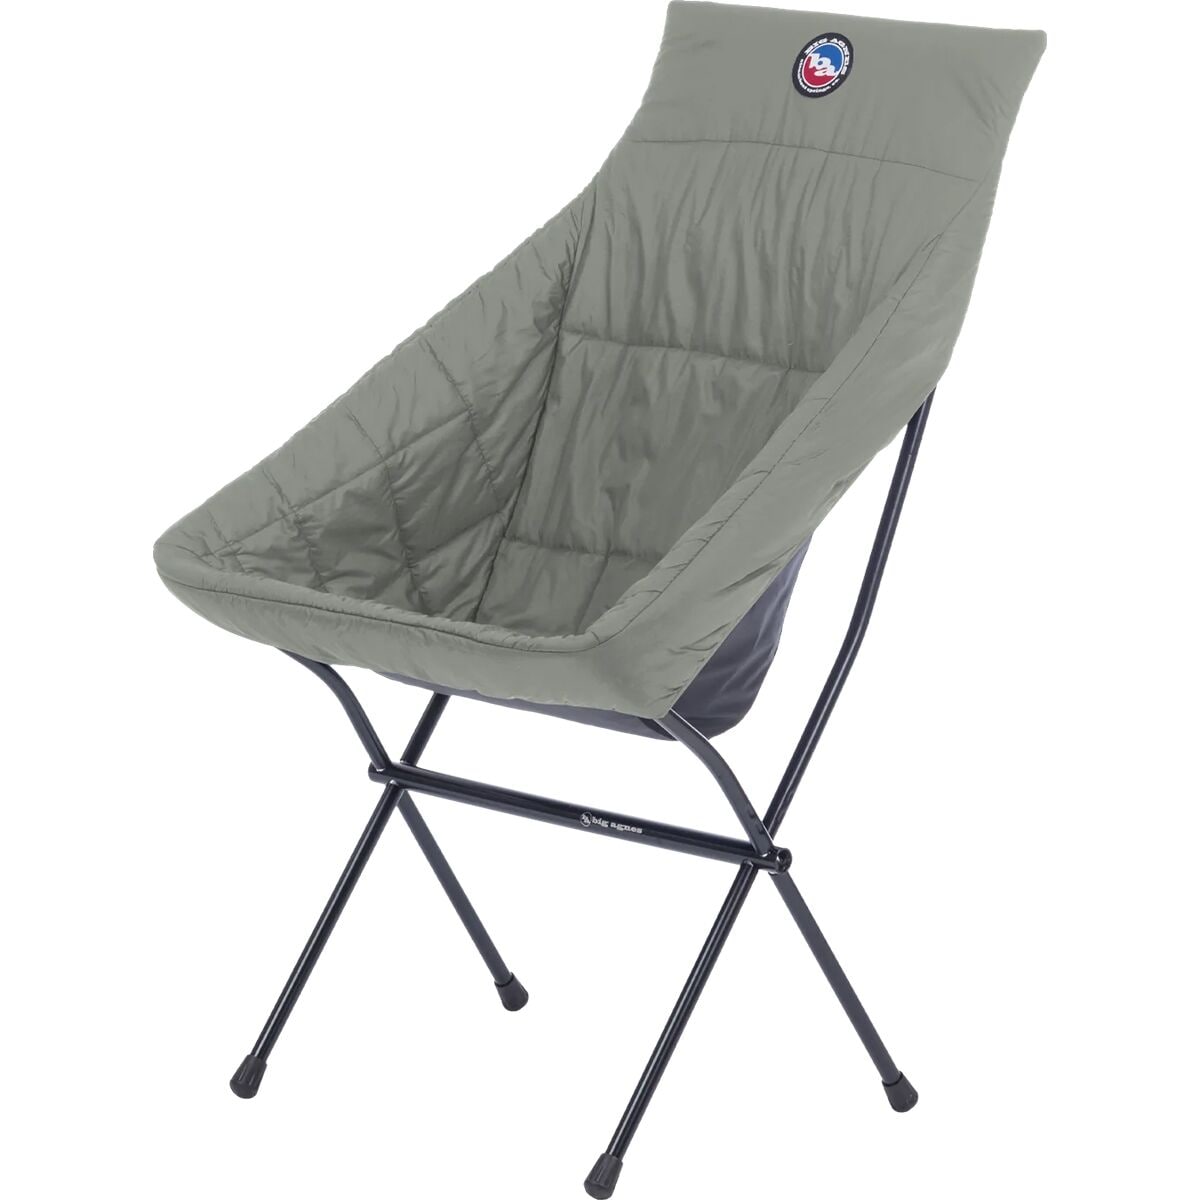 Photos - Outdoor Furniture Big Agnes Insulated Camp Chair Cover - Big Six Camp Chair 